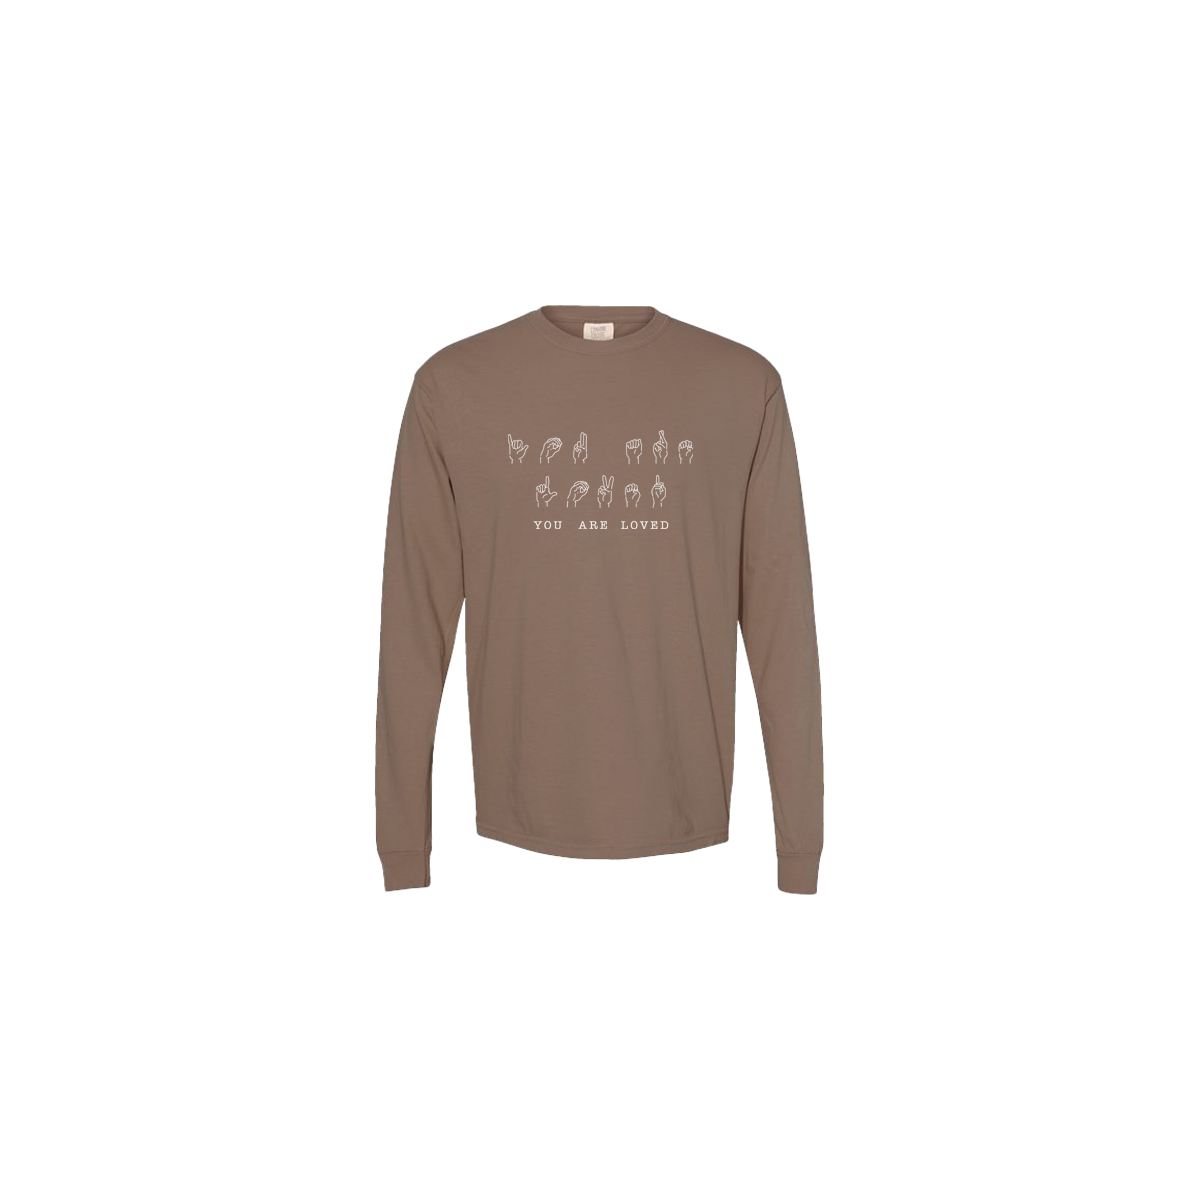 You Are Loved Sign Language Embroidered Brown Long Sleeve Tshirt - Mental Health Awareness Clothing